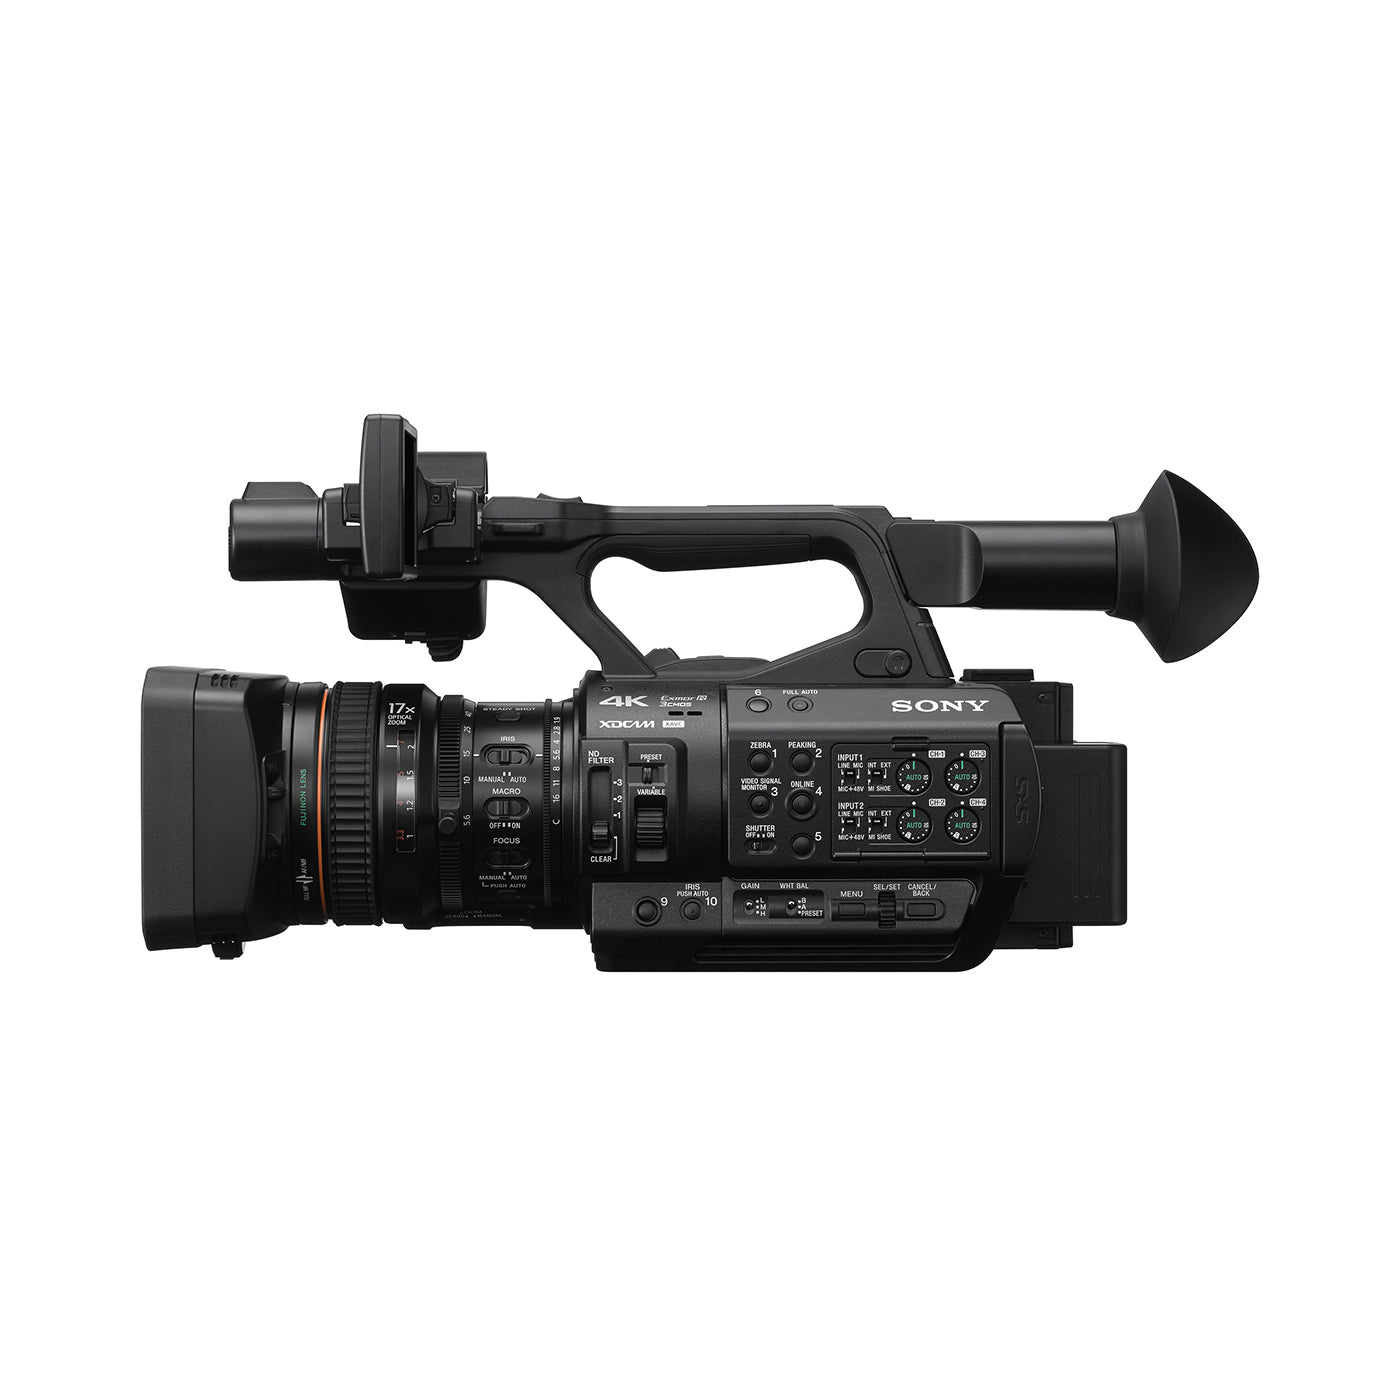 PXW-Z280 - World-leading 4K HDR handheld camcorder with 4K 3CMOS 1/2-type sensor and revolutionary networking capabilities for professionals.